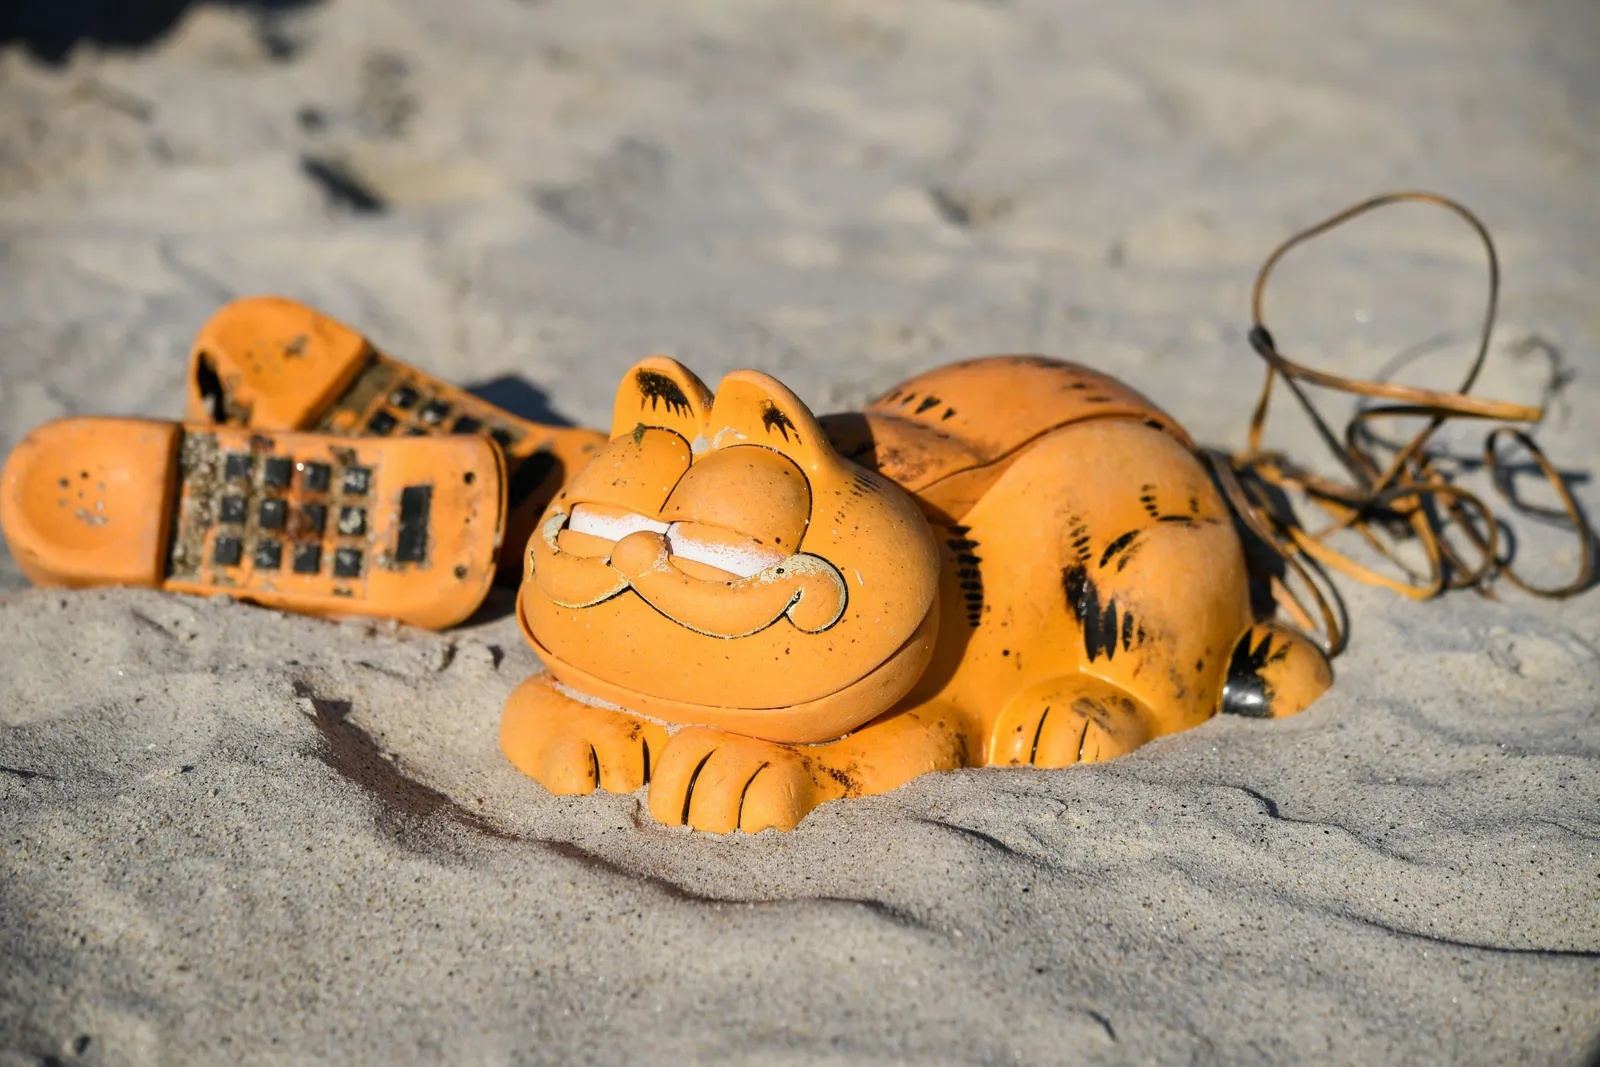 It started in the 1980s: Bright orange fragments of Garfield novelty phones were spotted washing up onto a stretch of coastline in Brittany, France. 